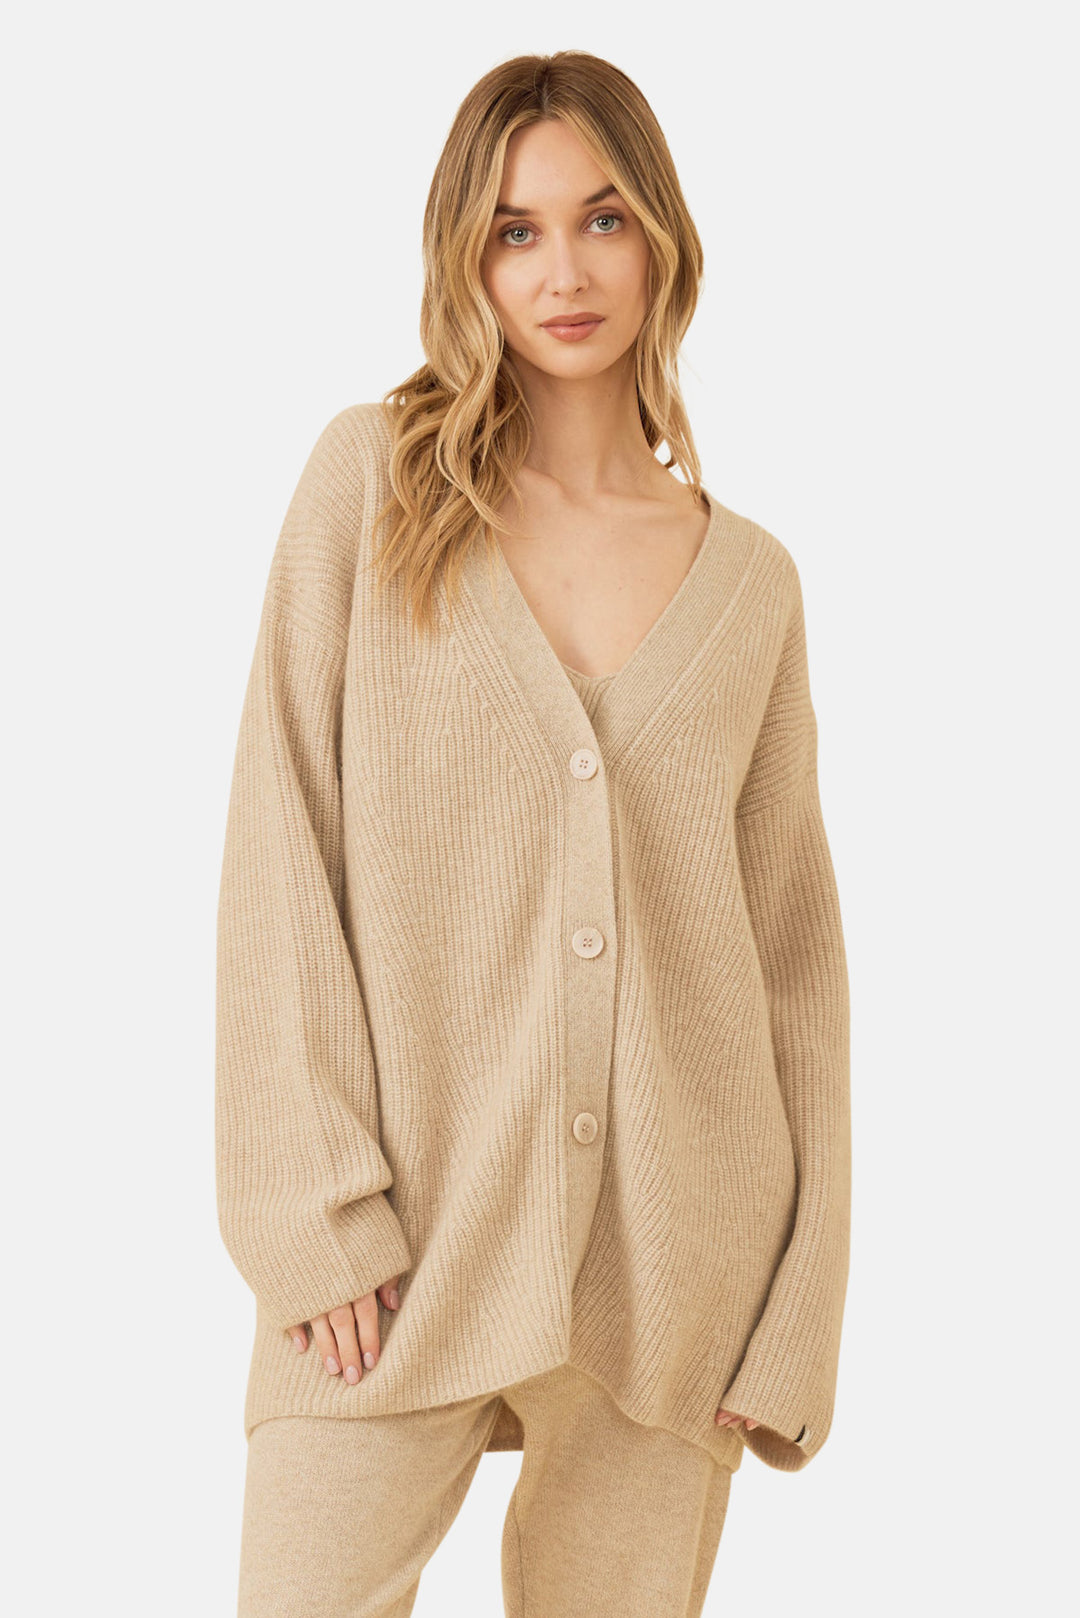 Pacific Cashmere Cardigan Oatmeal